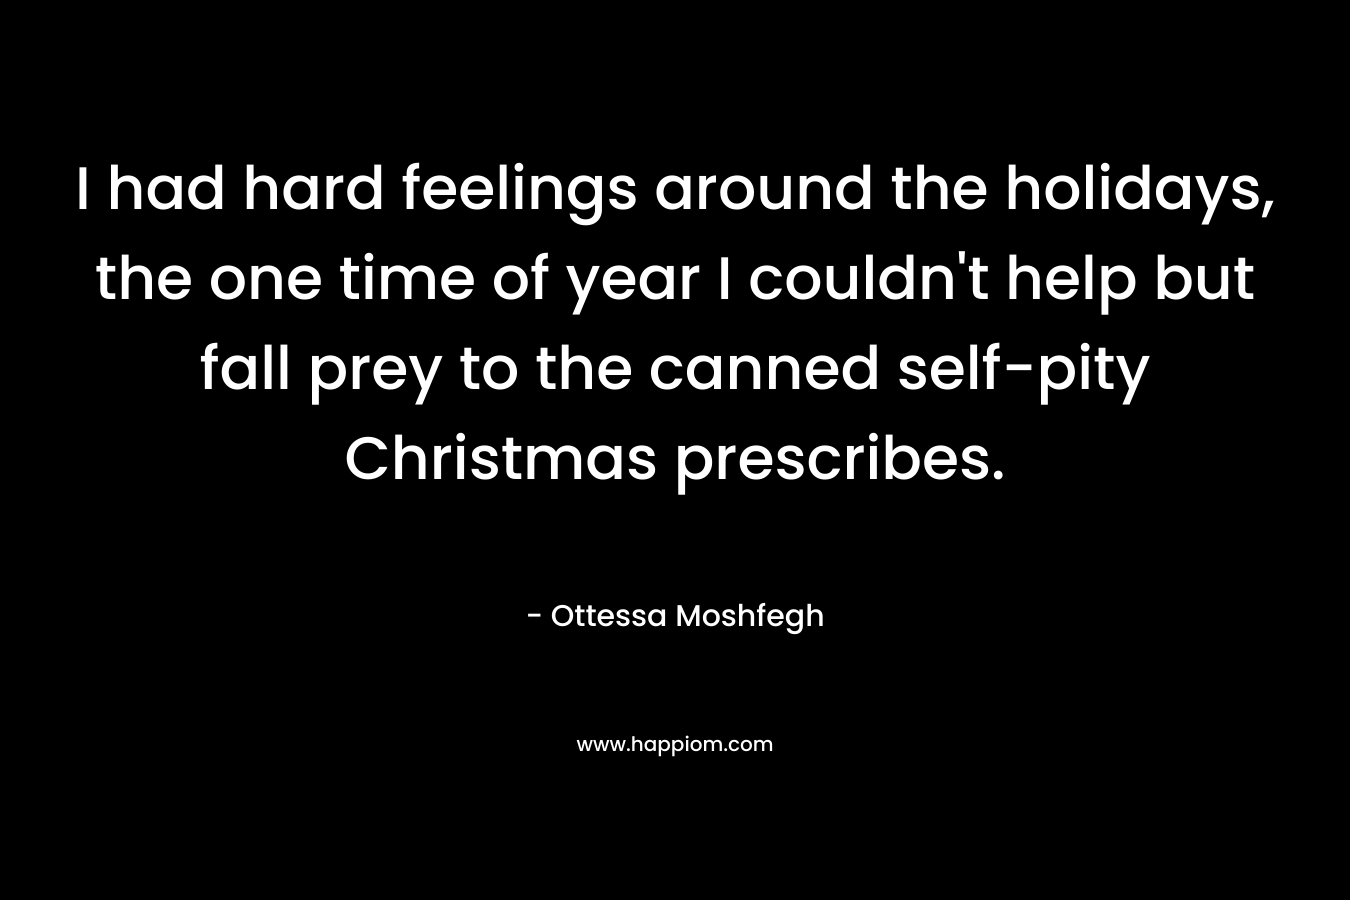 I had hard feelings around the holidays, the one time of year I couldn’t help but fall prey to the canned self-pity Christmas prescribes. – Ottessa Moshfegh